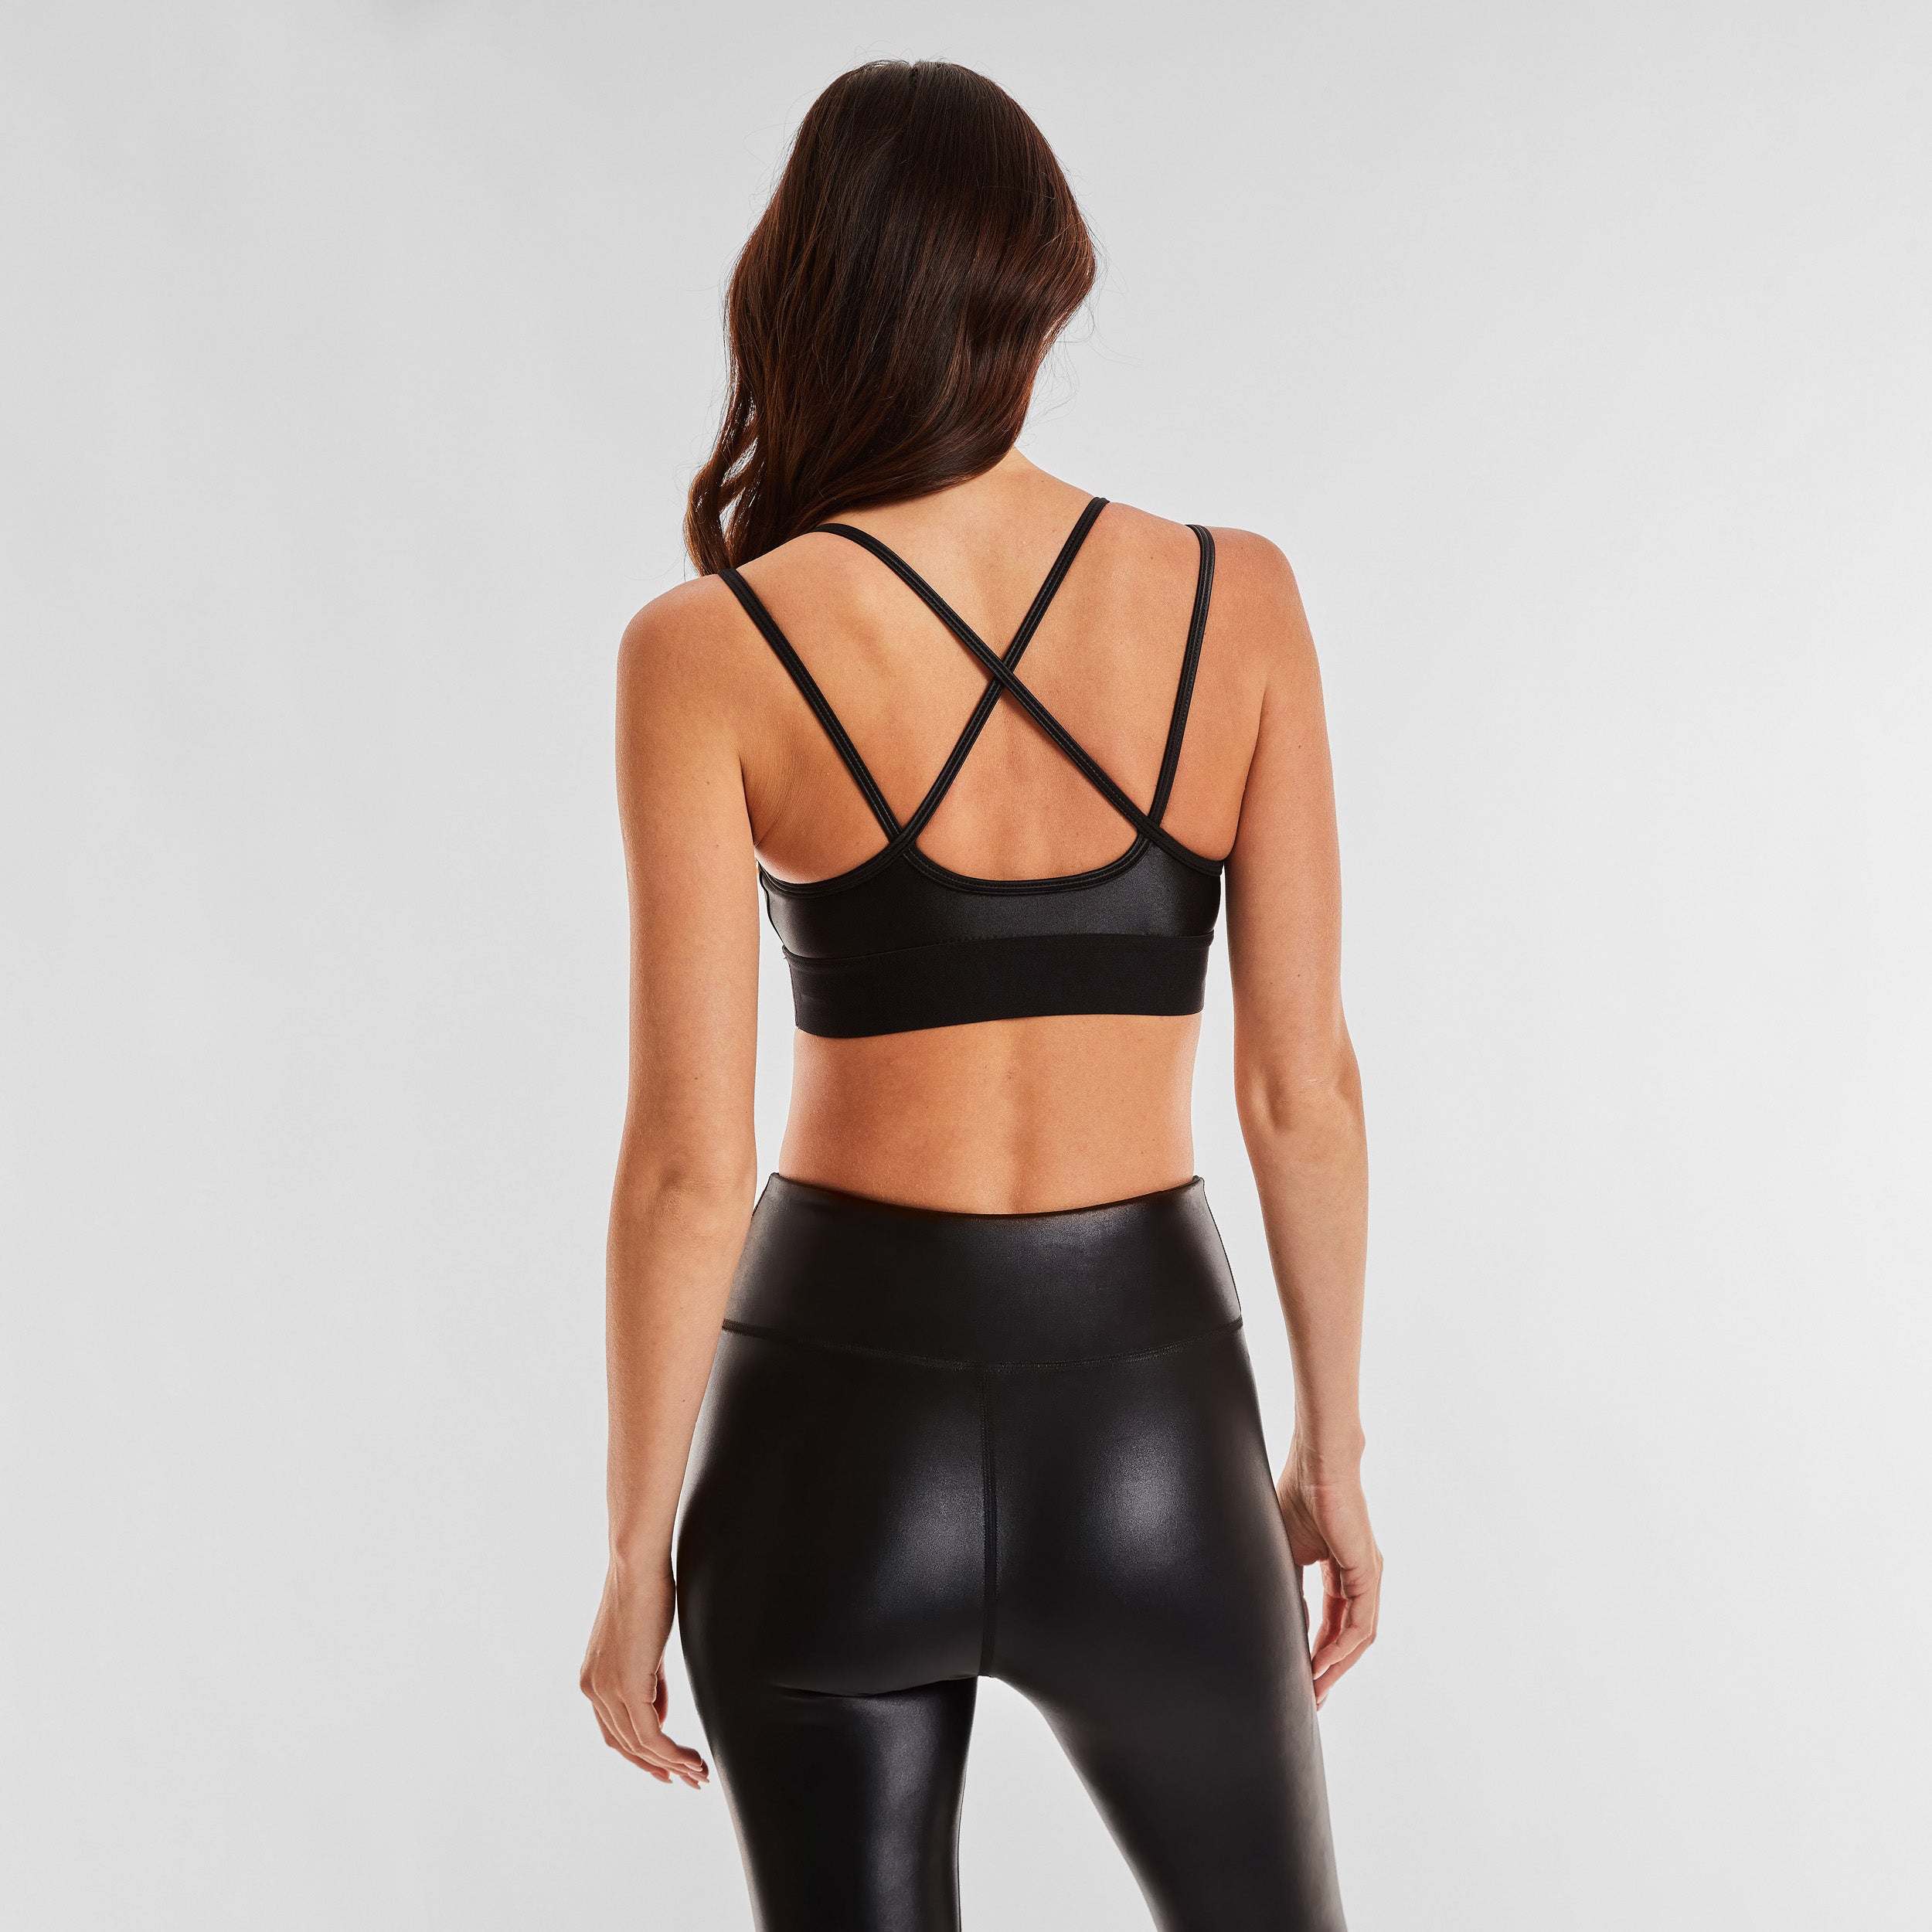 Rear view of woman wearing black gloss liquid sports bra featuring a scoop neckline and an alluring strappy back with a supportive elastic band